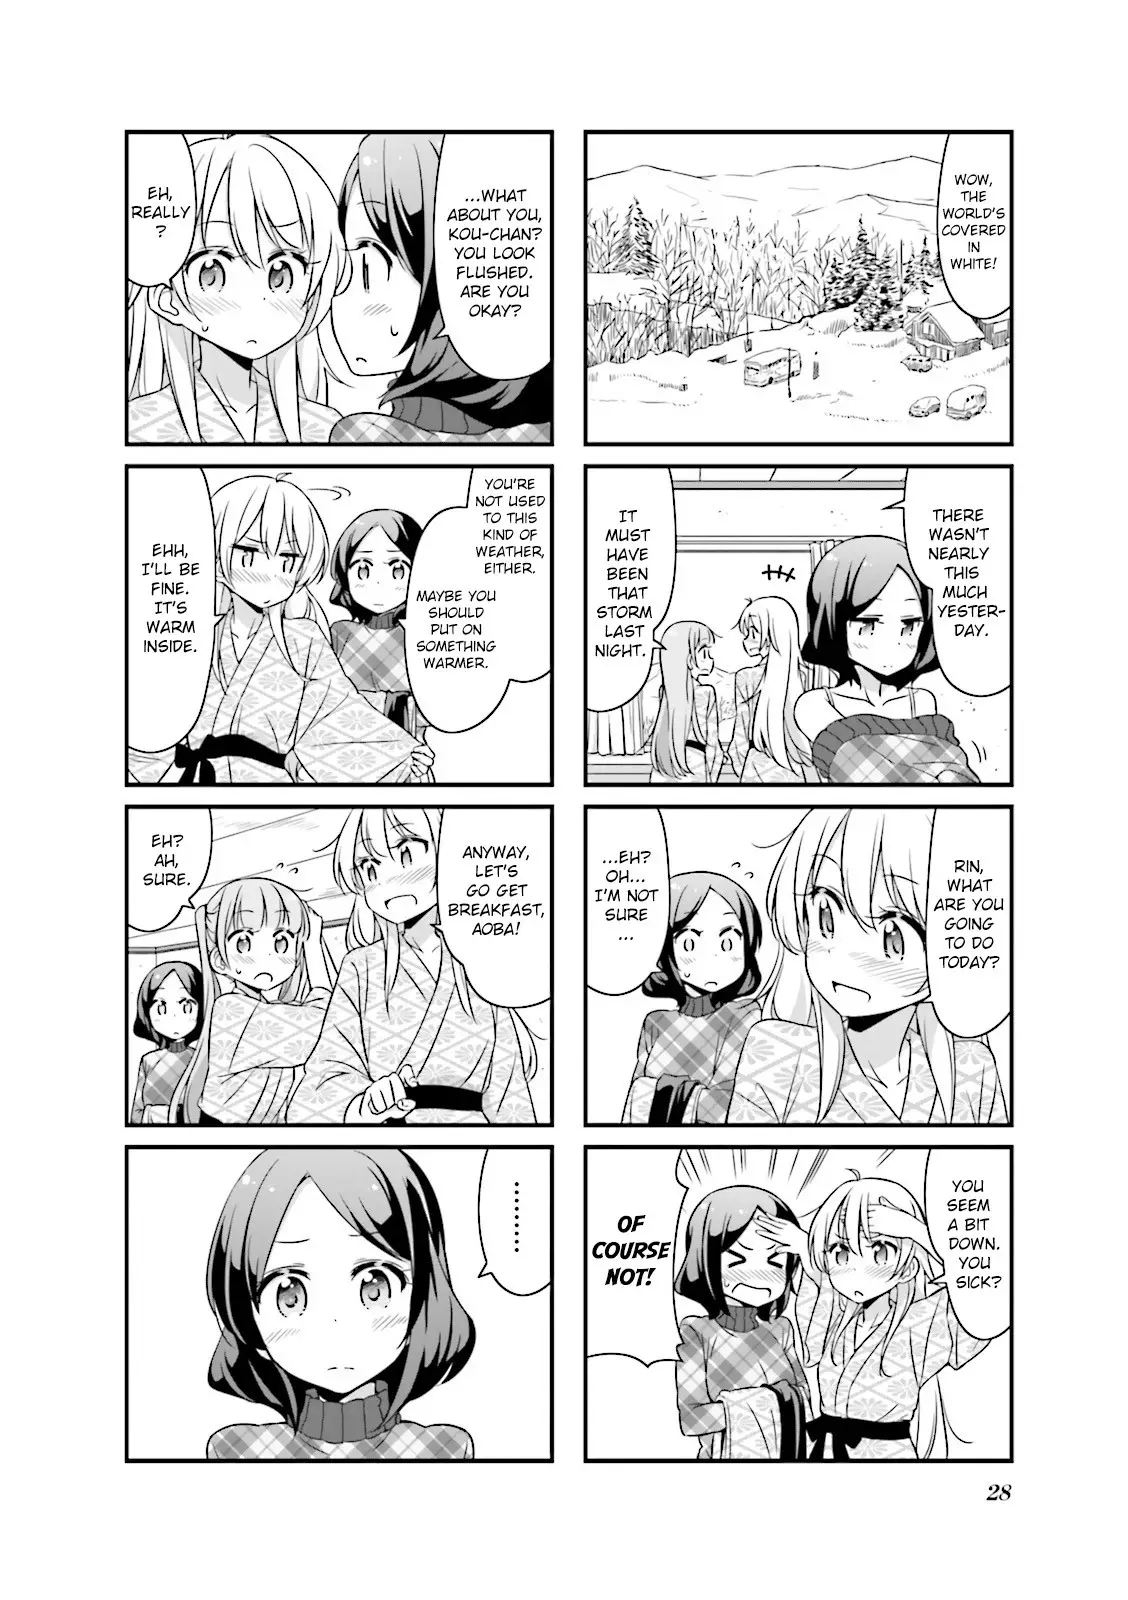 New Game! - 28 page p_00004